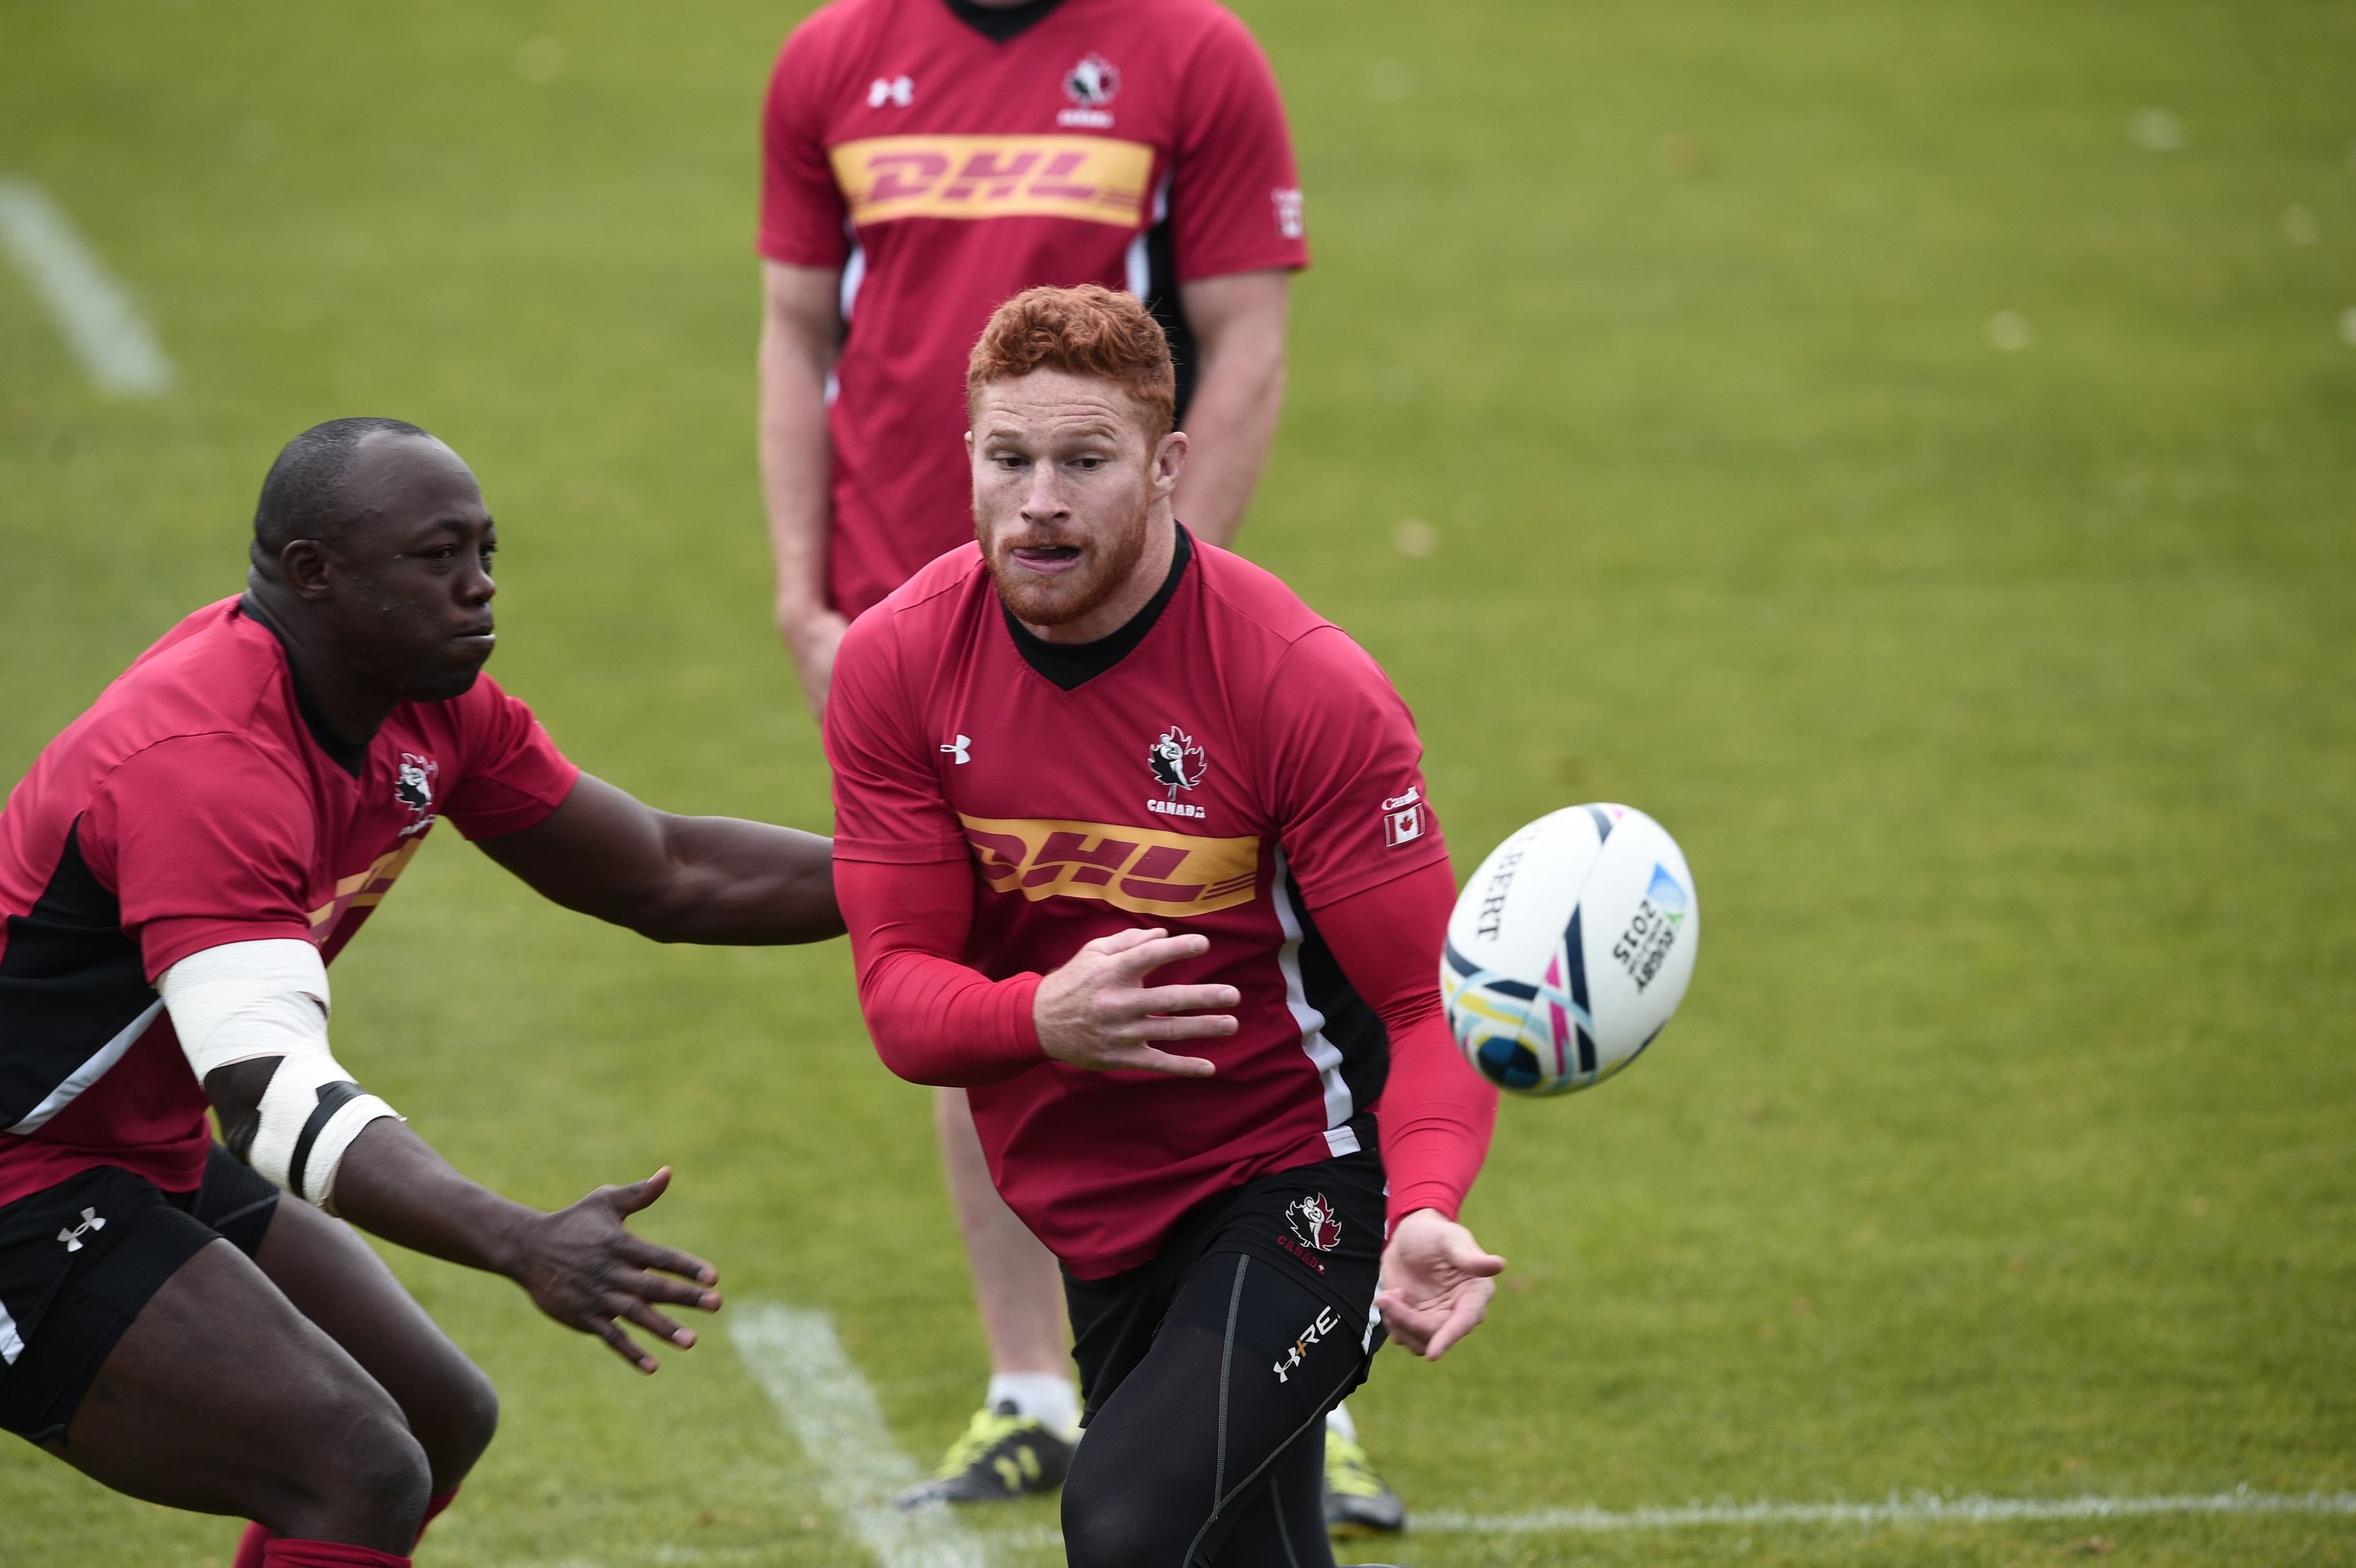 Canada's scrum-half Jamie Mackenzie (R) passes the ball next to Canada's flanker Nanyak Dala   during  a training session at Swansea university, on September 15, 2015, ahead of the 2015 Rugby Union World Cup. The 2015 Rugby World Cup starts on September 18.  AFP PHOTO / DAMIEN MEYER        (Photo credit should read DAMIEN MEYER/AFP/Getty Images)